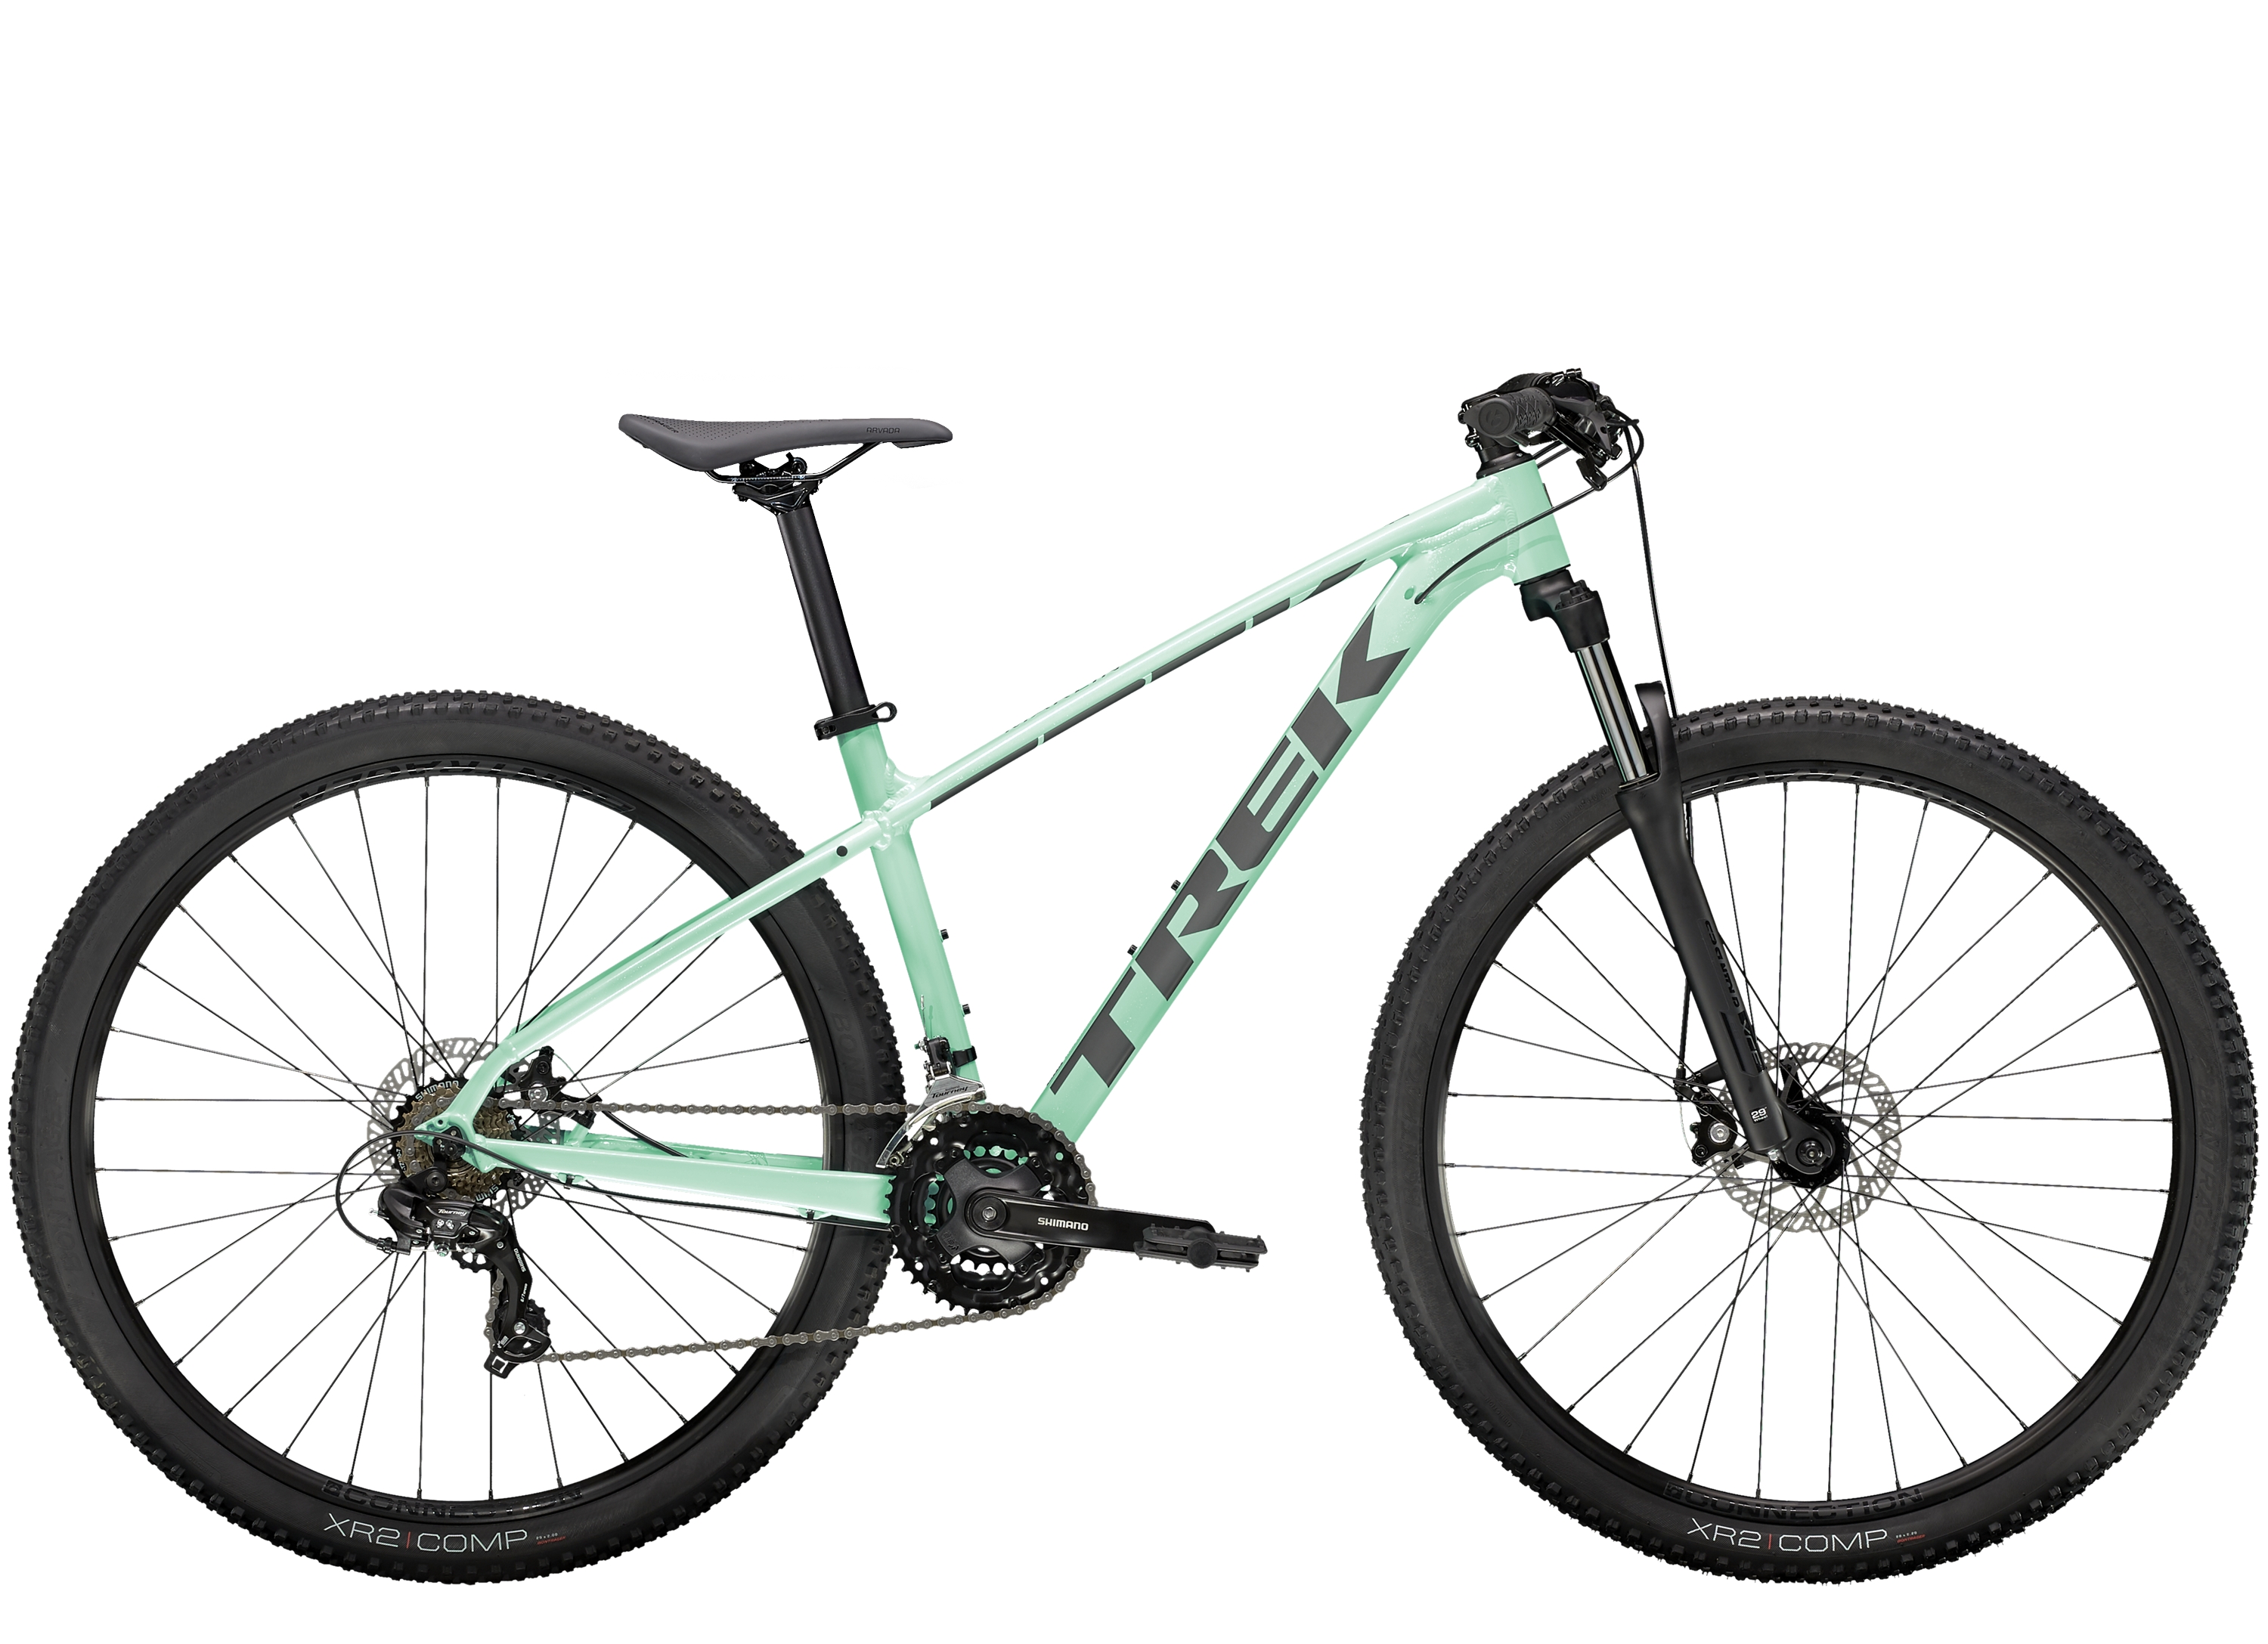 <a href="https://cycles-clement.be/product/marlin-4-xs-27-5-voodoo-aloha-green/">MARLIN 4 XS 27.5 VOODOO ALOHA GREEN</a>